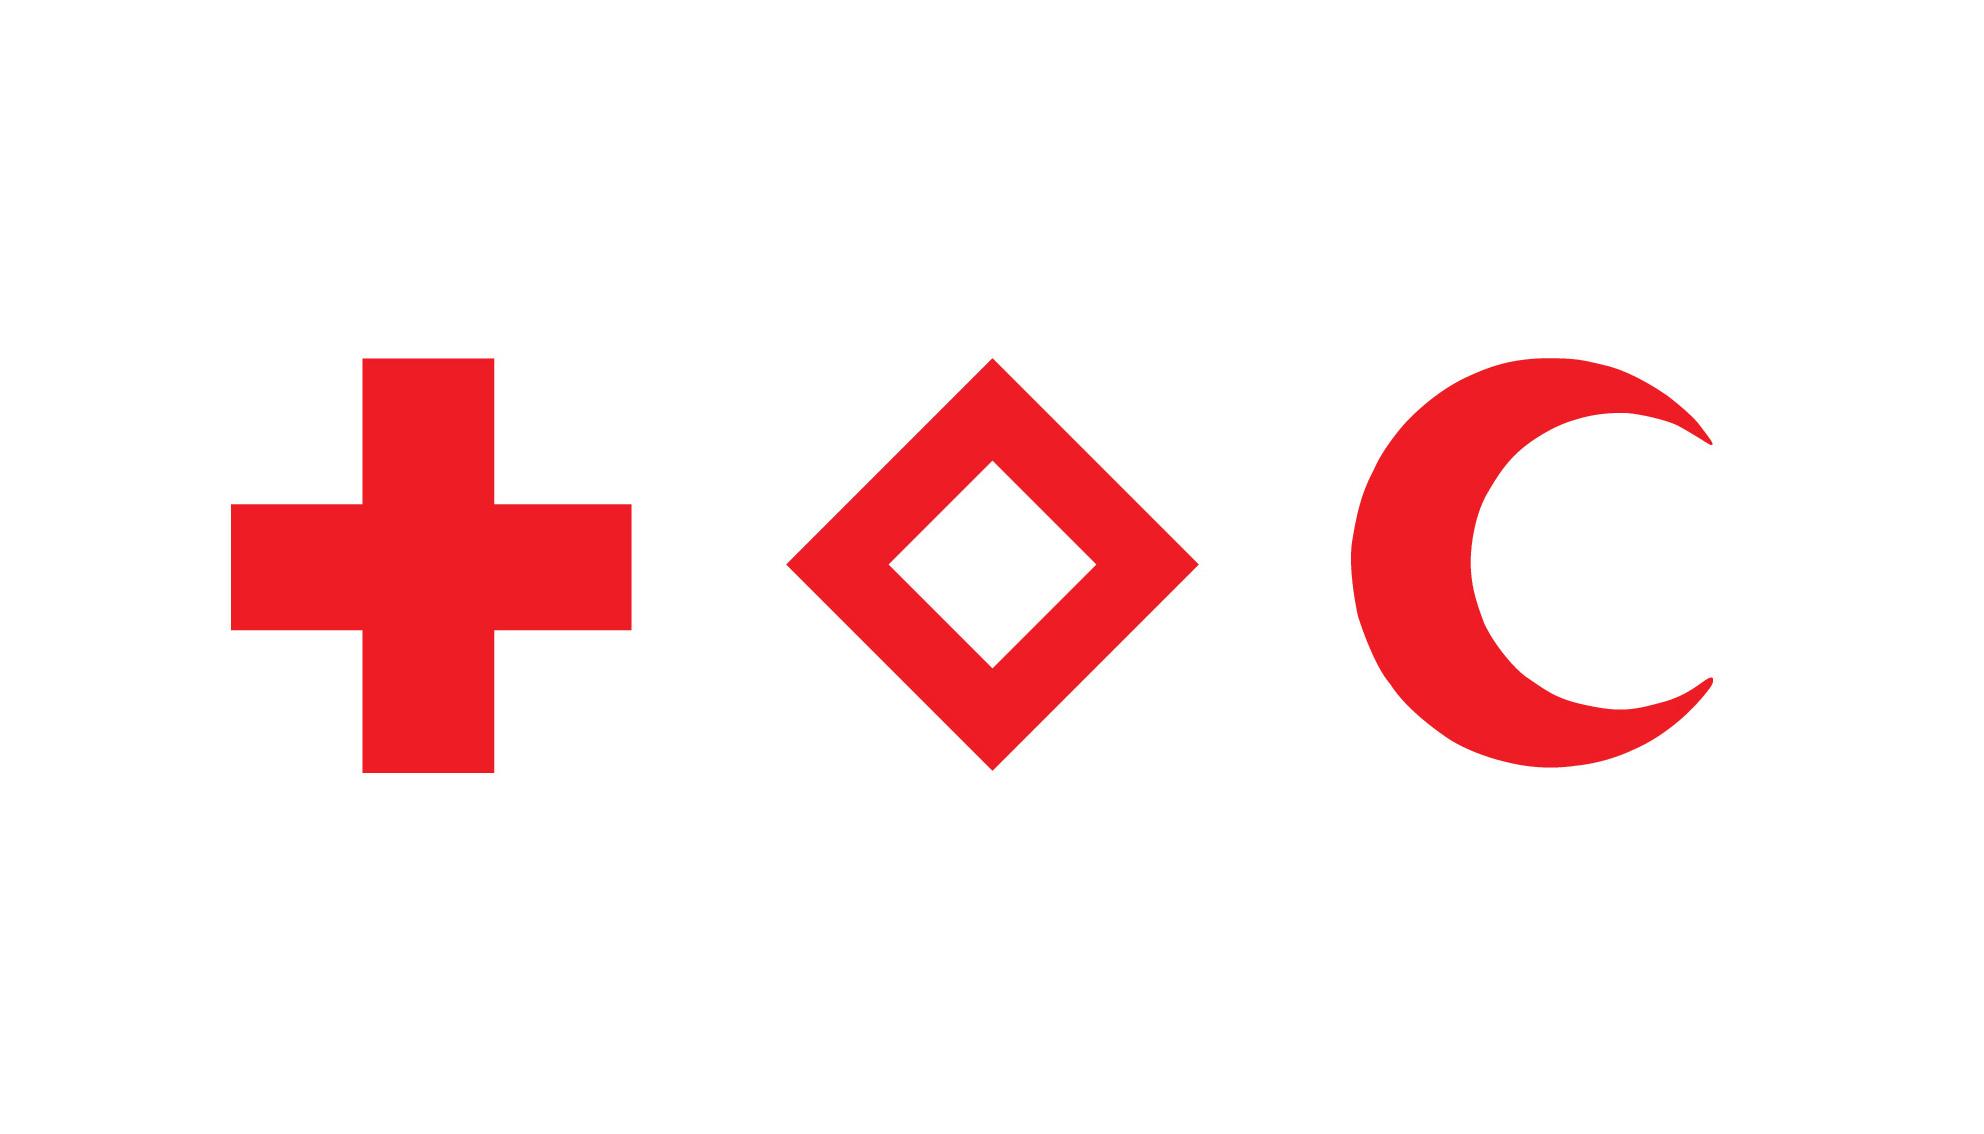 Graphic with the three emblems Red Cross, Red Crystal and Red Crescent